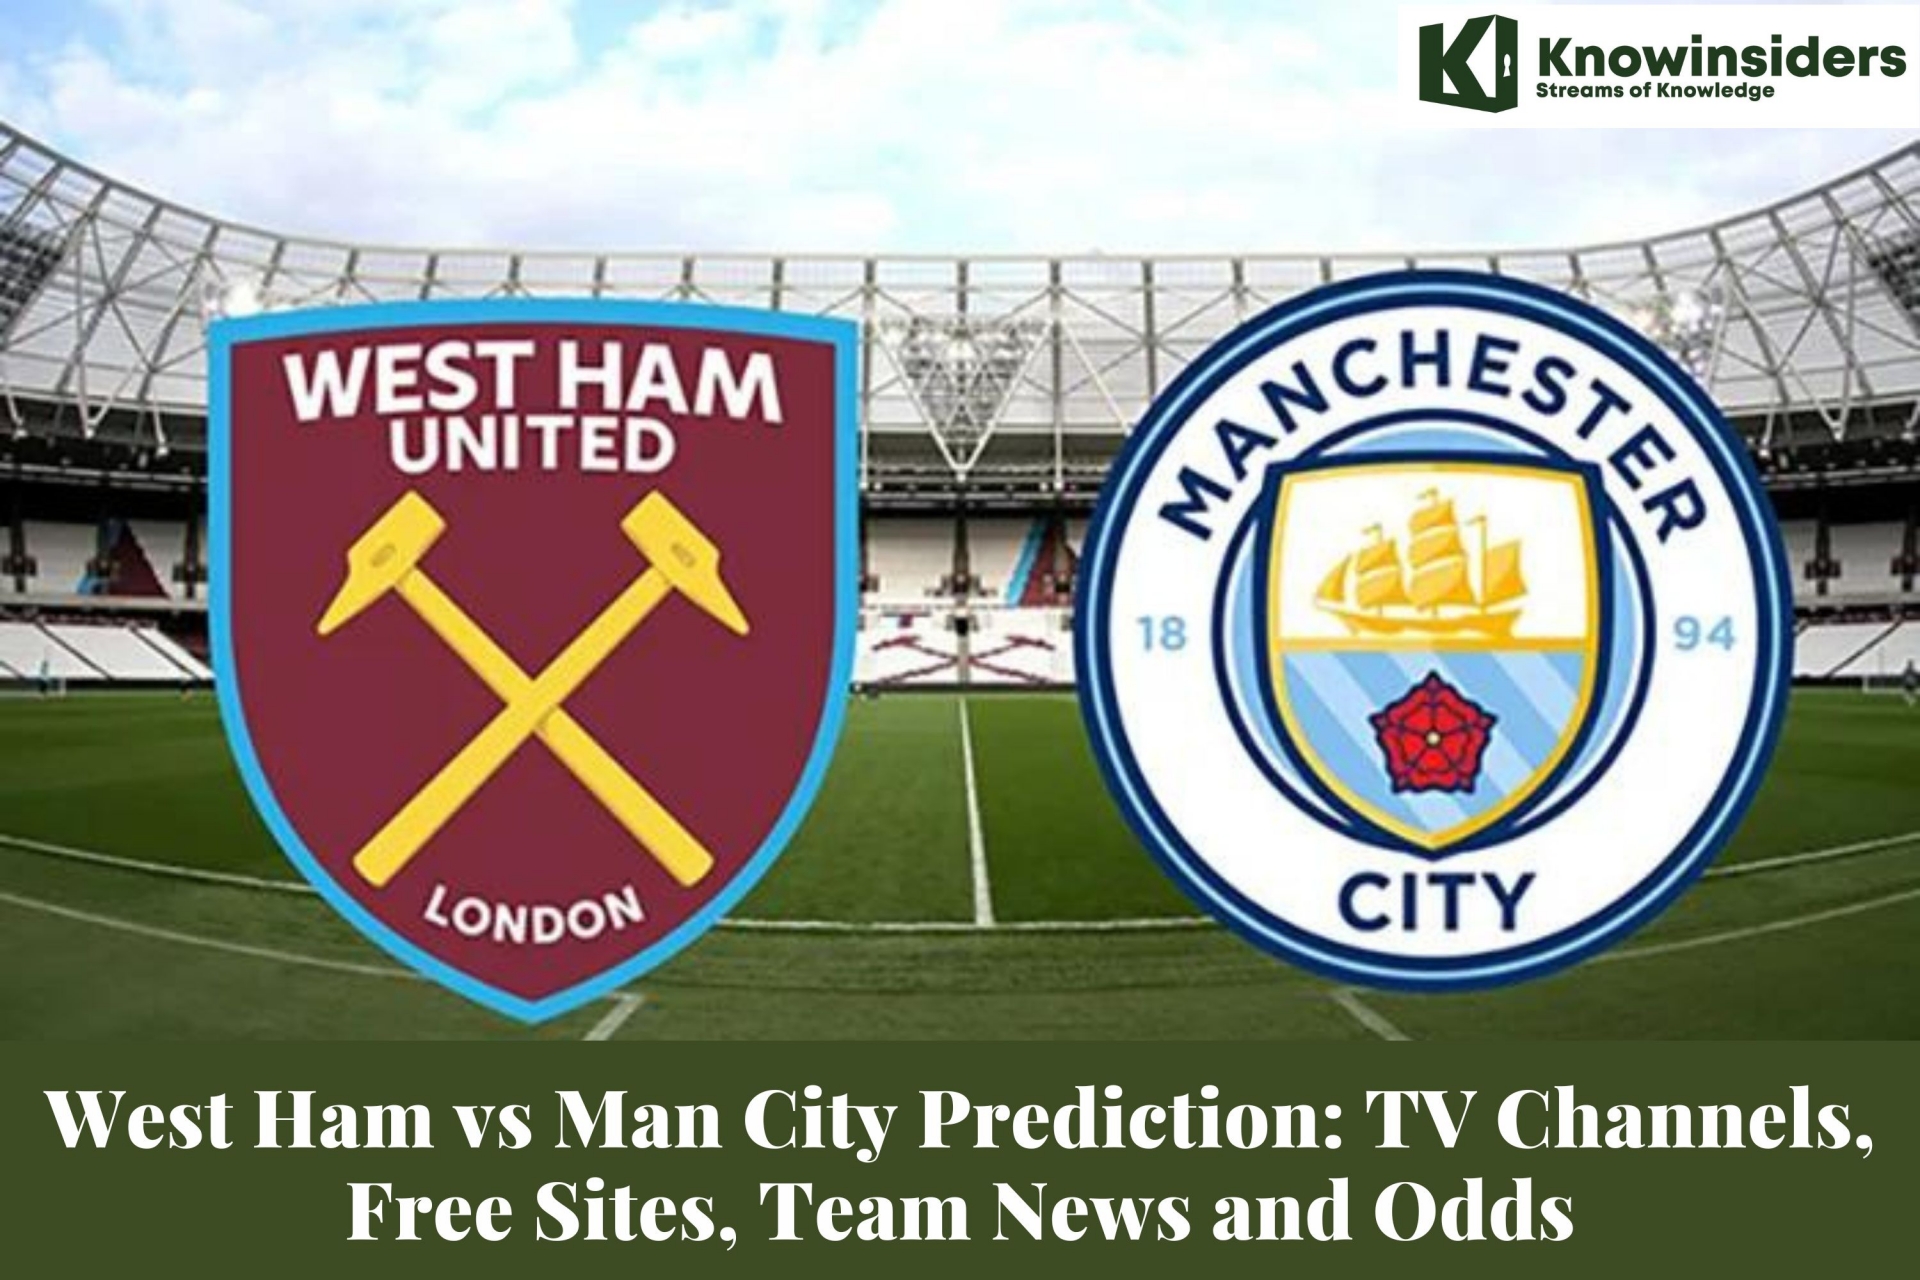 West Ham vs Man City Prediction: TV Channels, Free Sites, Team News and Odds